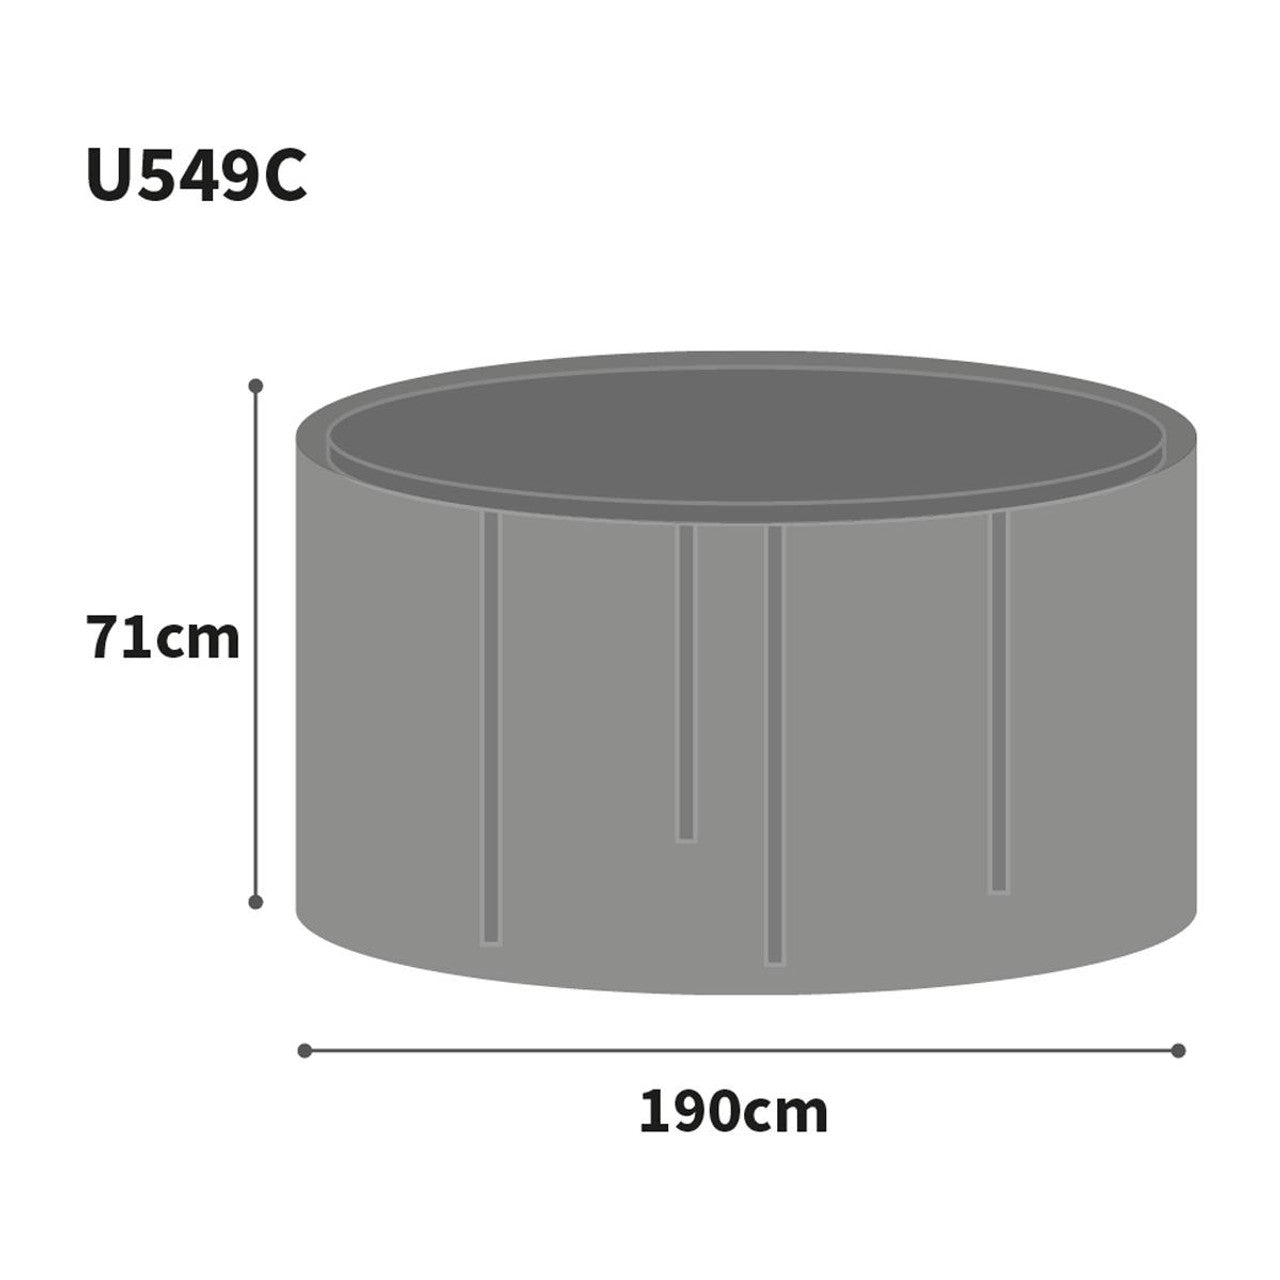 Bosmere Ultimate Protector Outdoor Furniture Cover for Extra Large Round Table 190cm x 71cm High